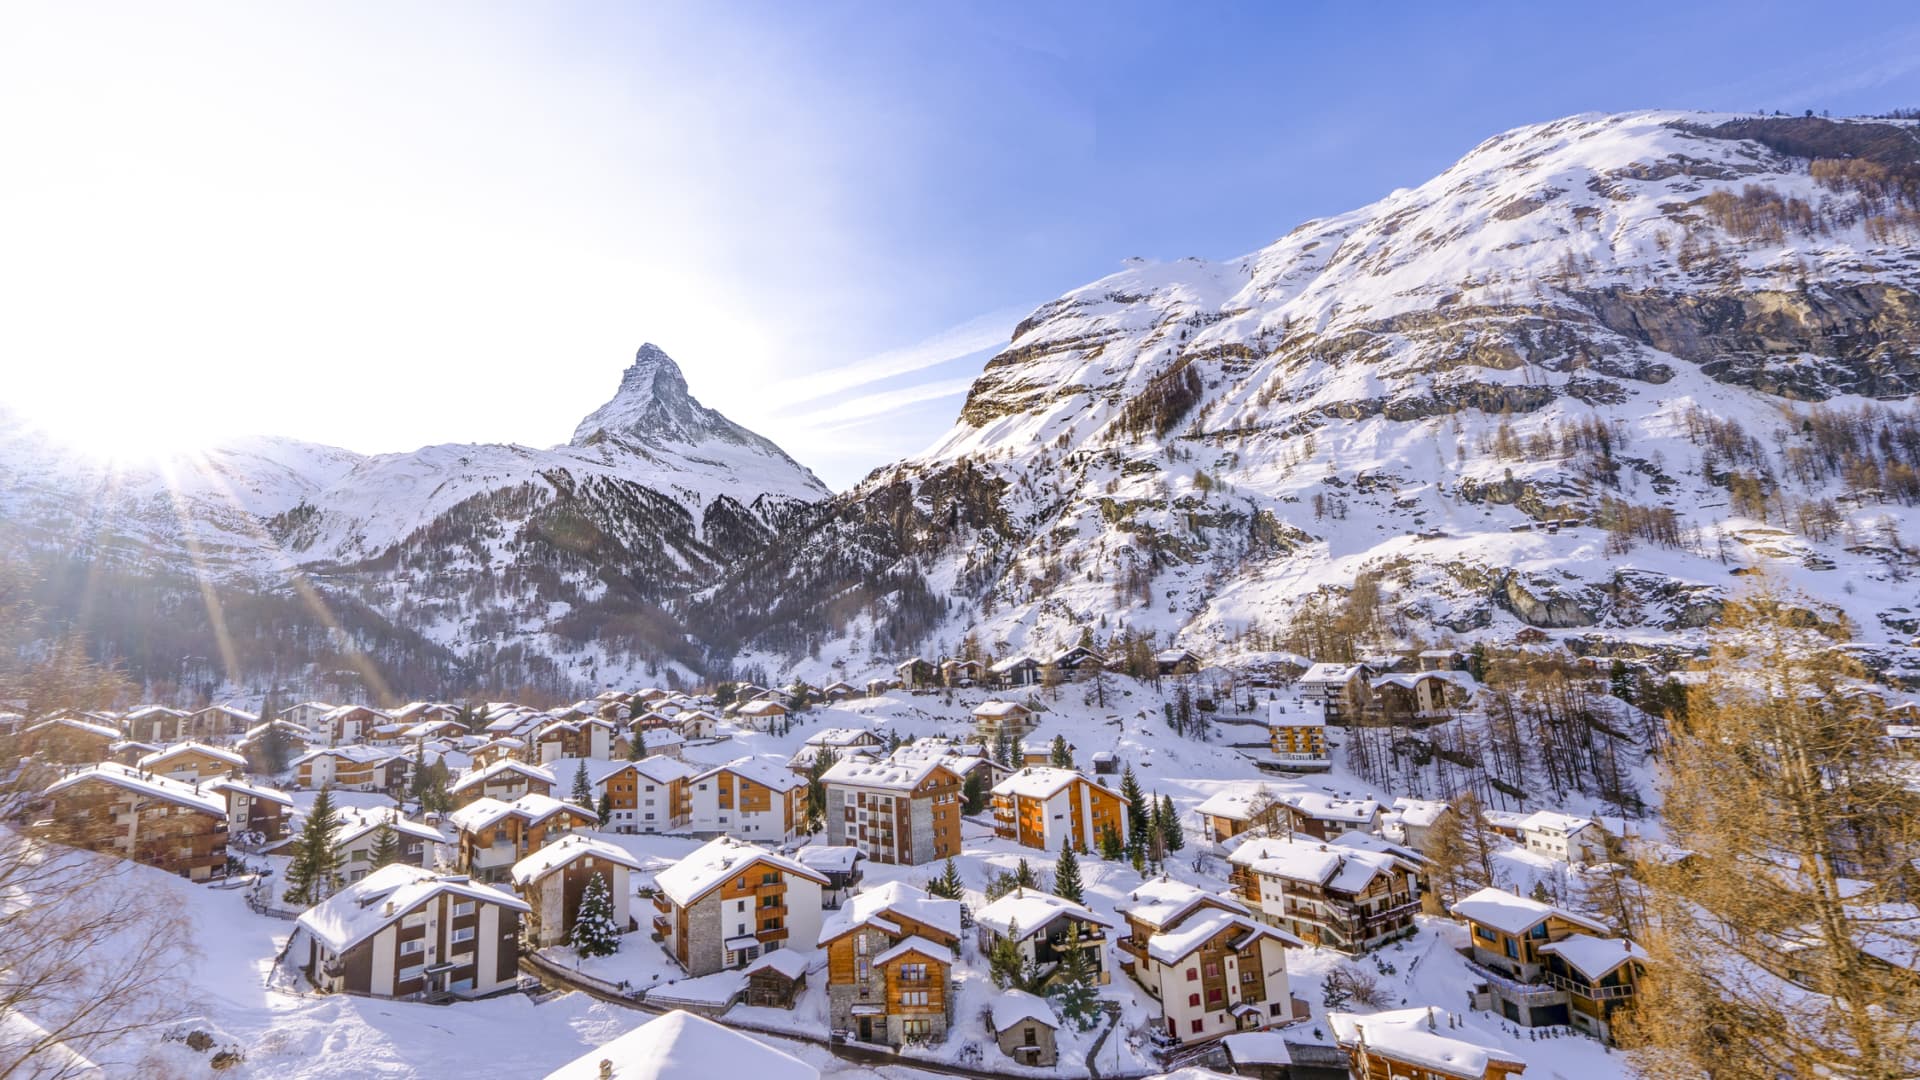 Zermatt, Switzerland is one of the few European mountain resorts to open its slopes to skiers this winter.